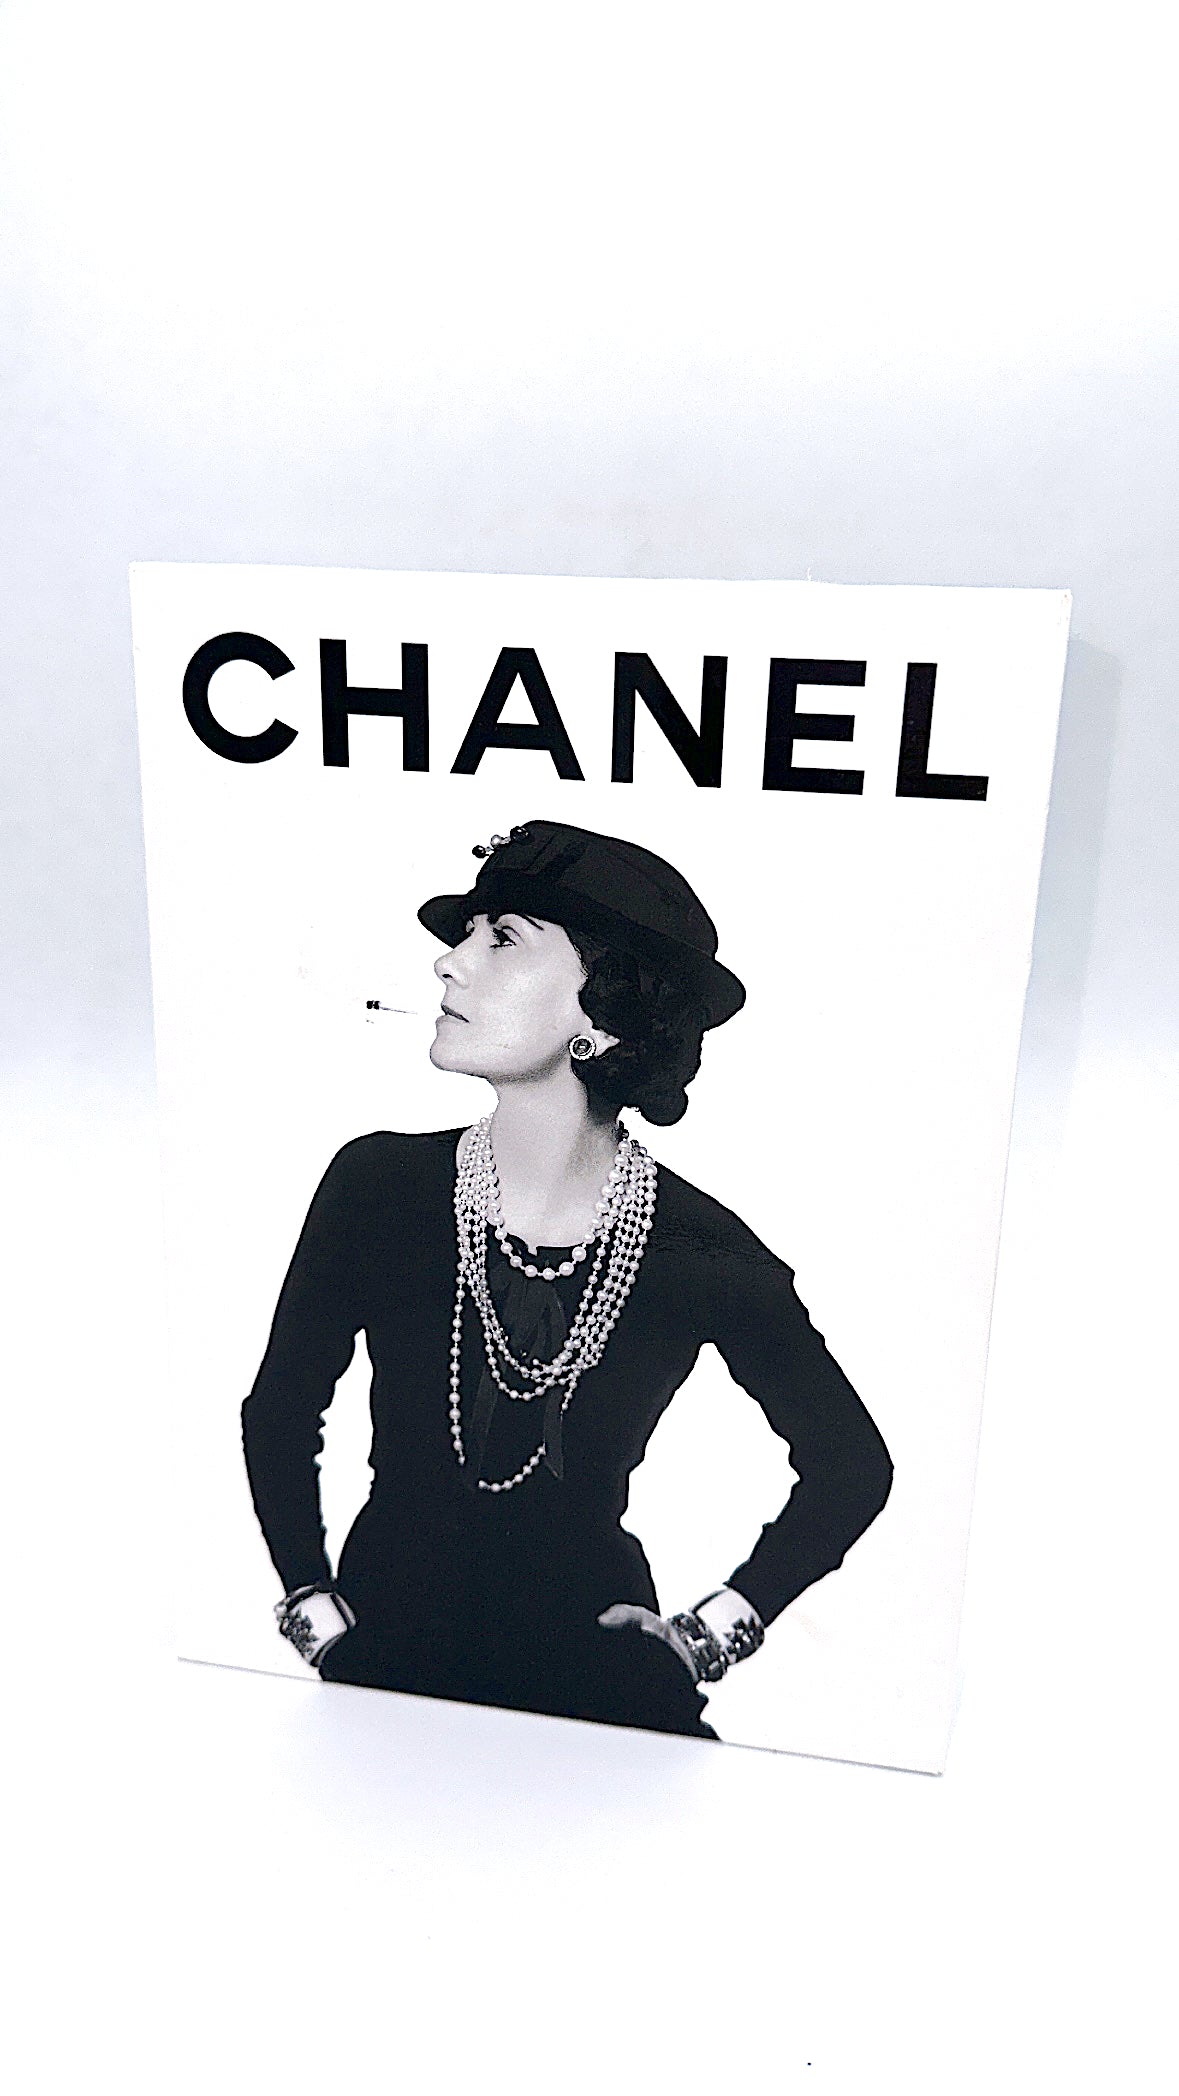 chanel table book